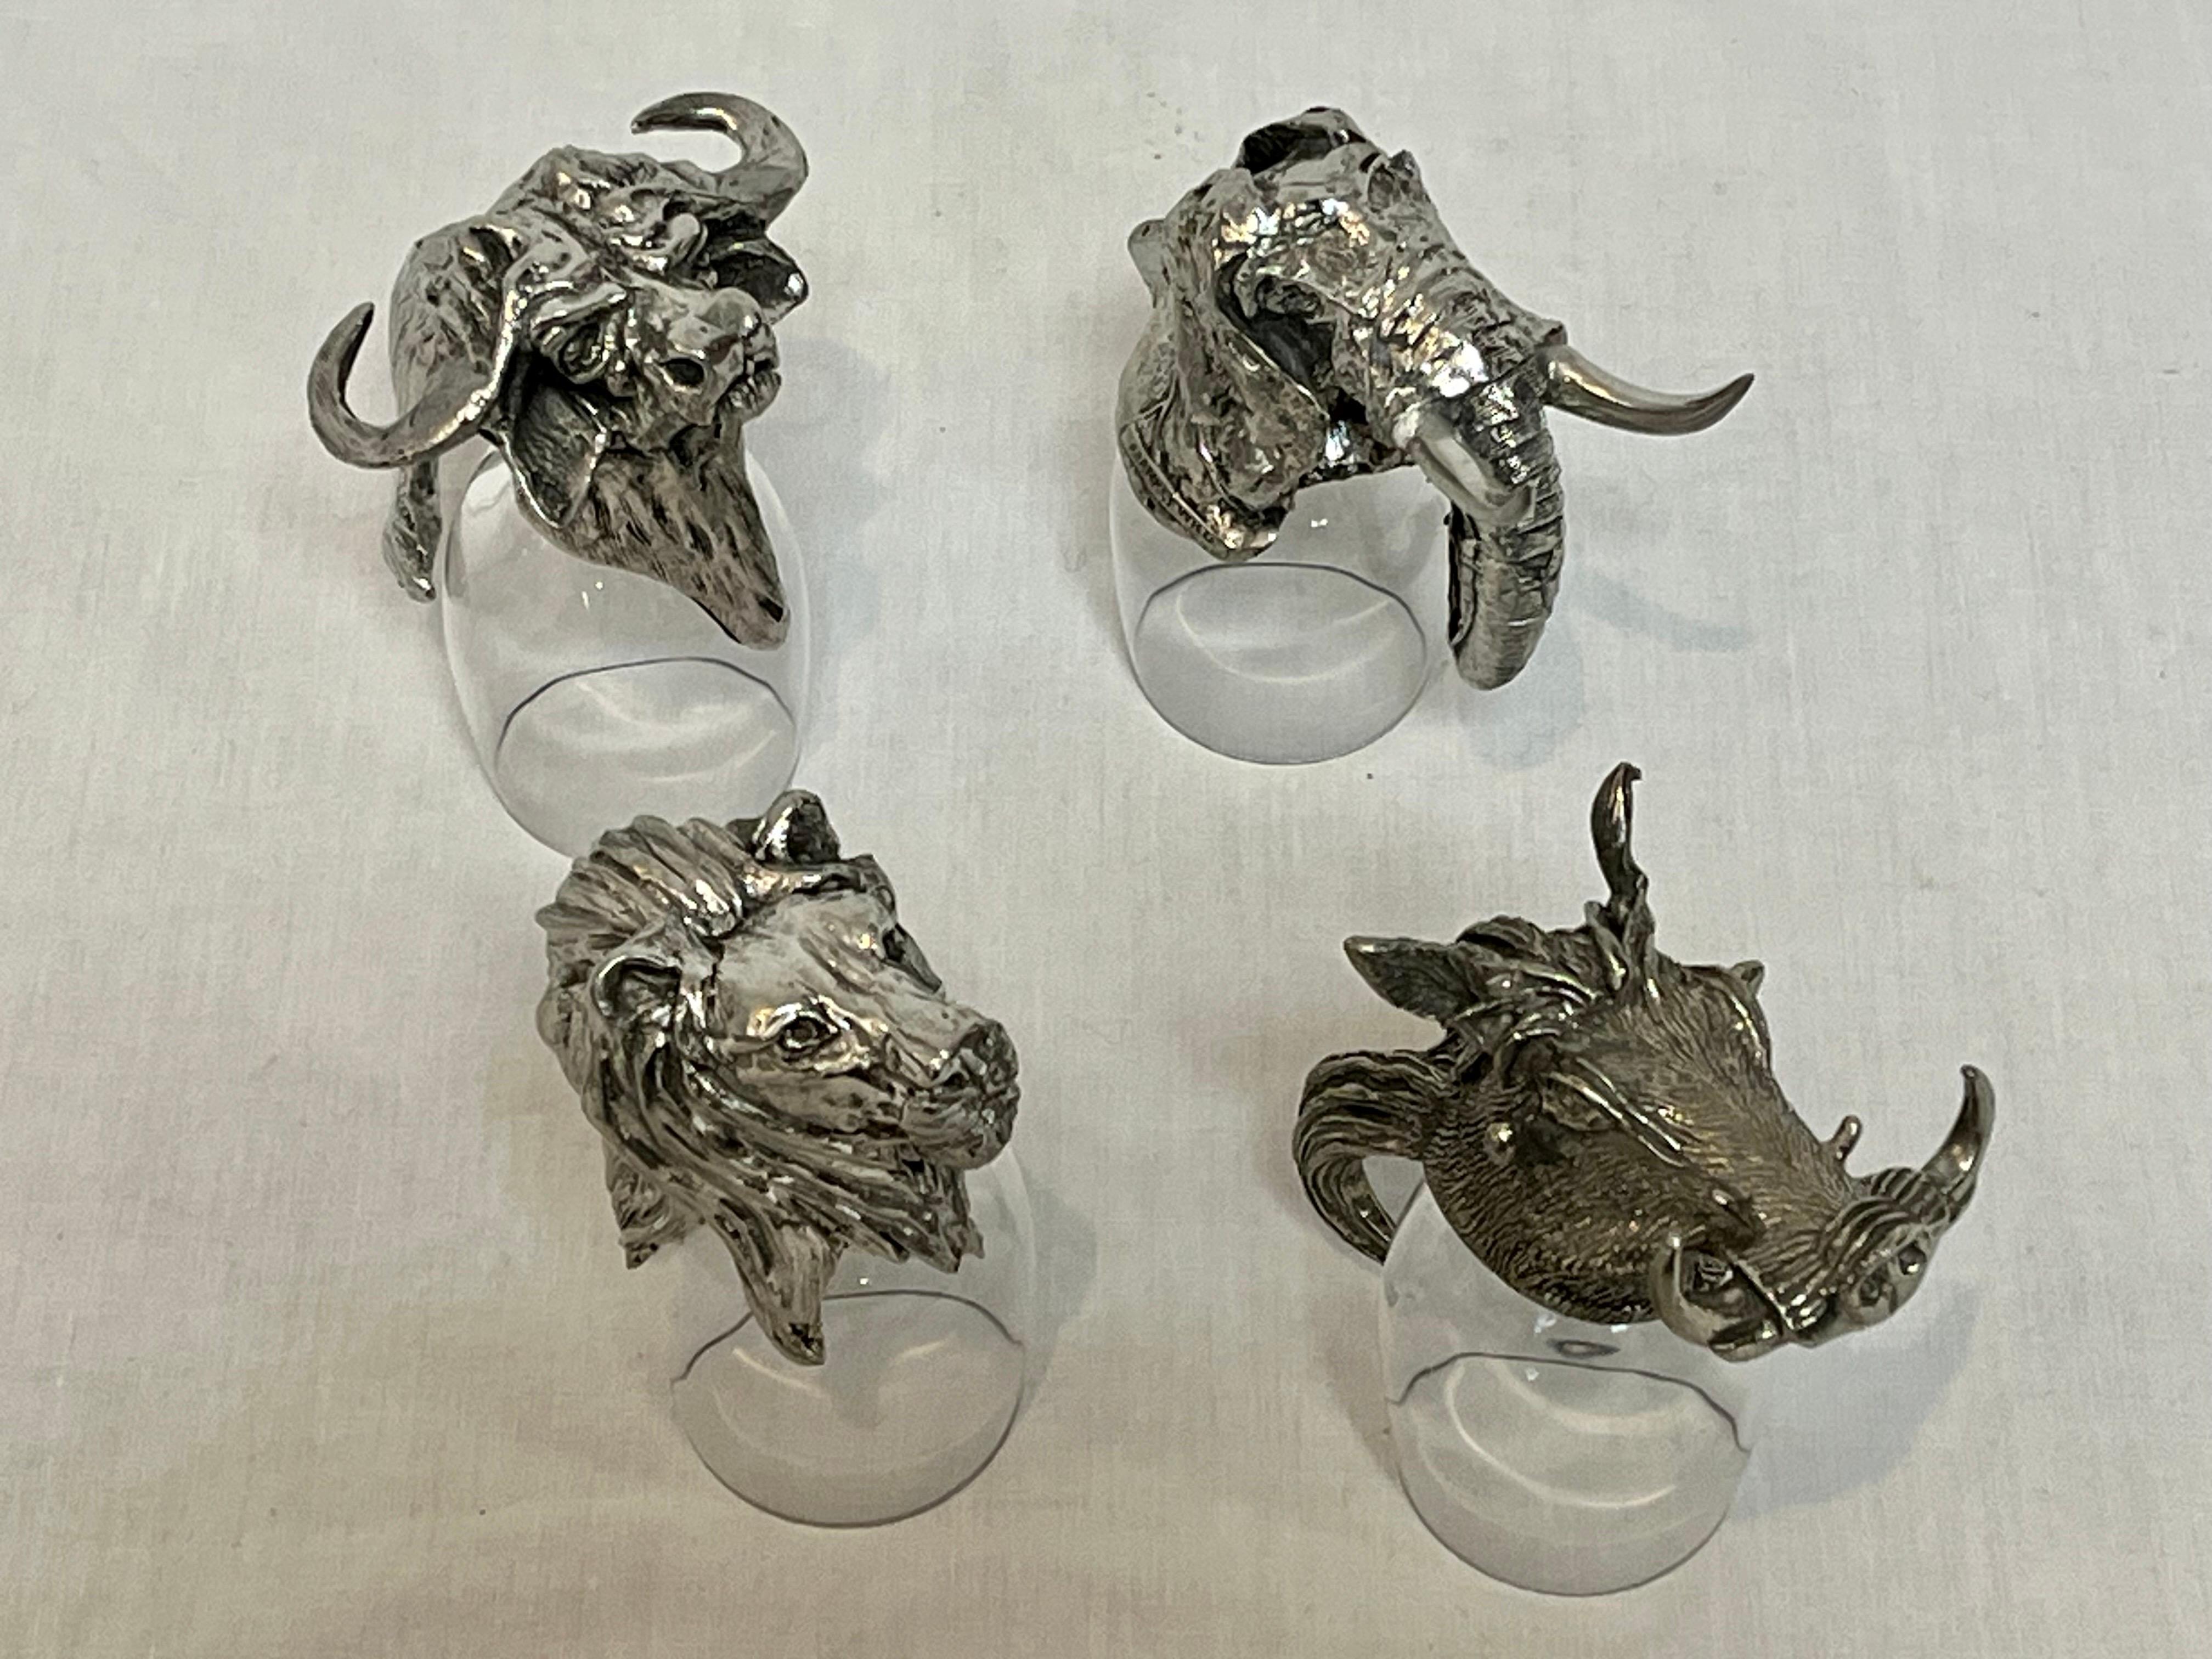 A highly detailed and exotic set of four Frankli Wild for Royal Selangor animal shot glasses. Depicting a lion, an African water buffalo, an elephant and a wild boar - these four animals come together to inspire your inner safari. The glasses /